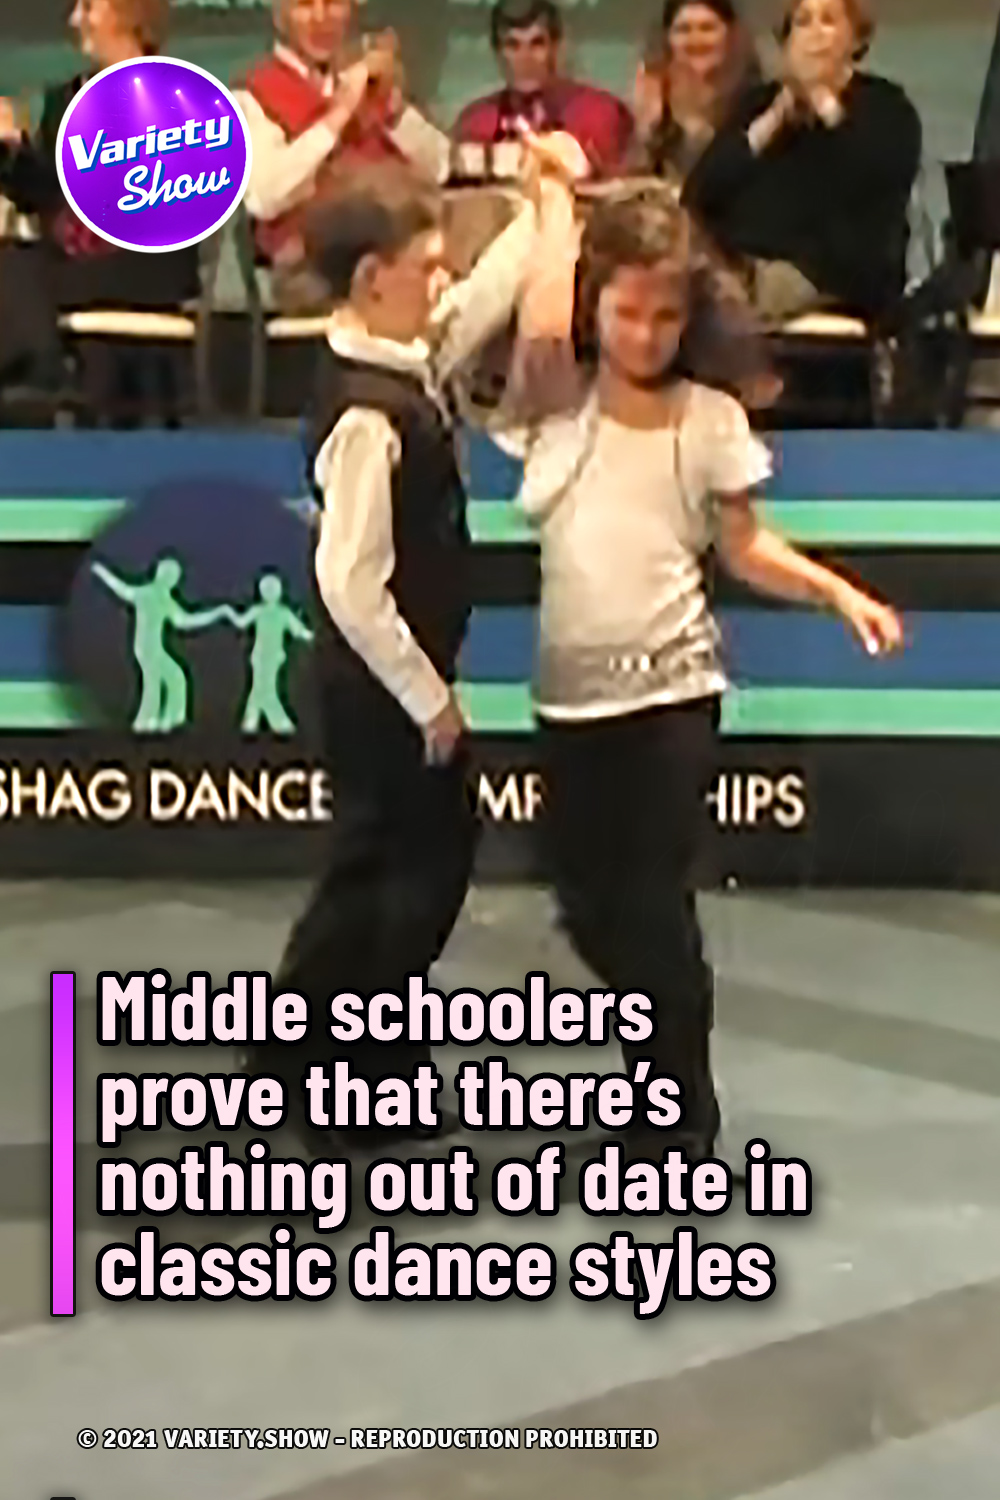 Middle schoolers prove that there’s nothing out of date in classic dance styles